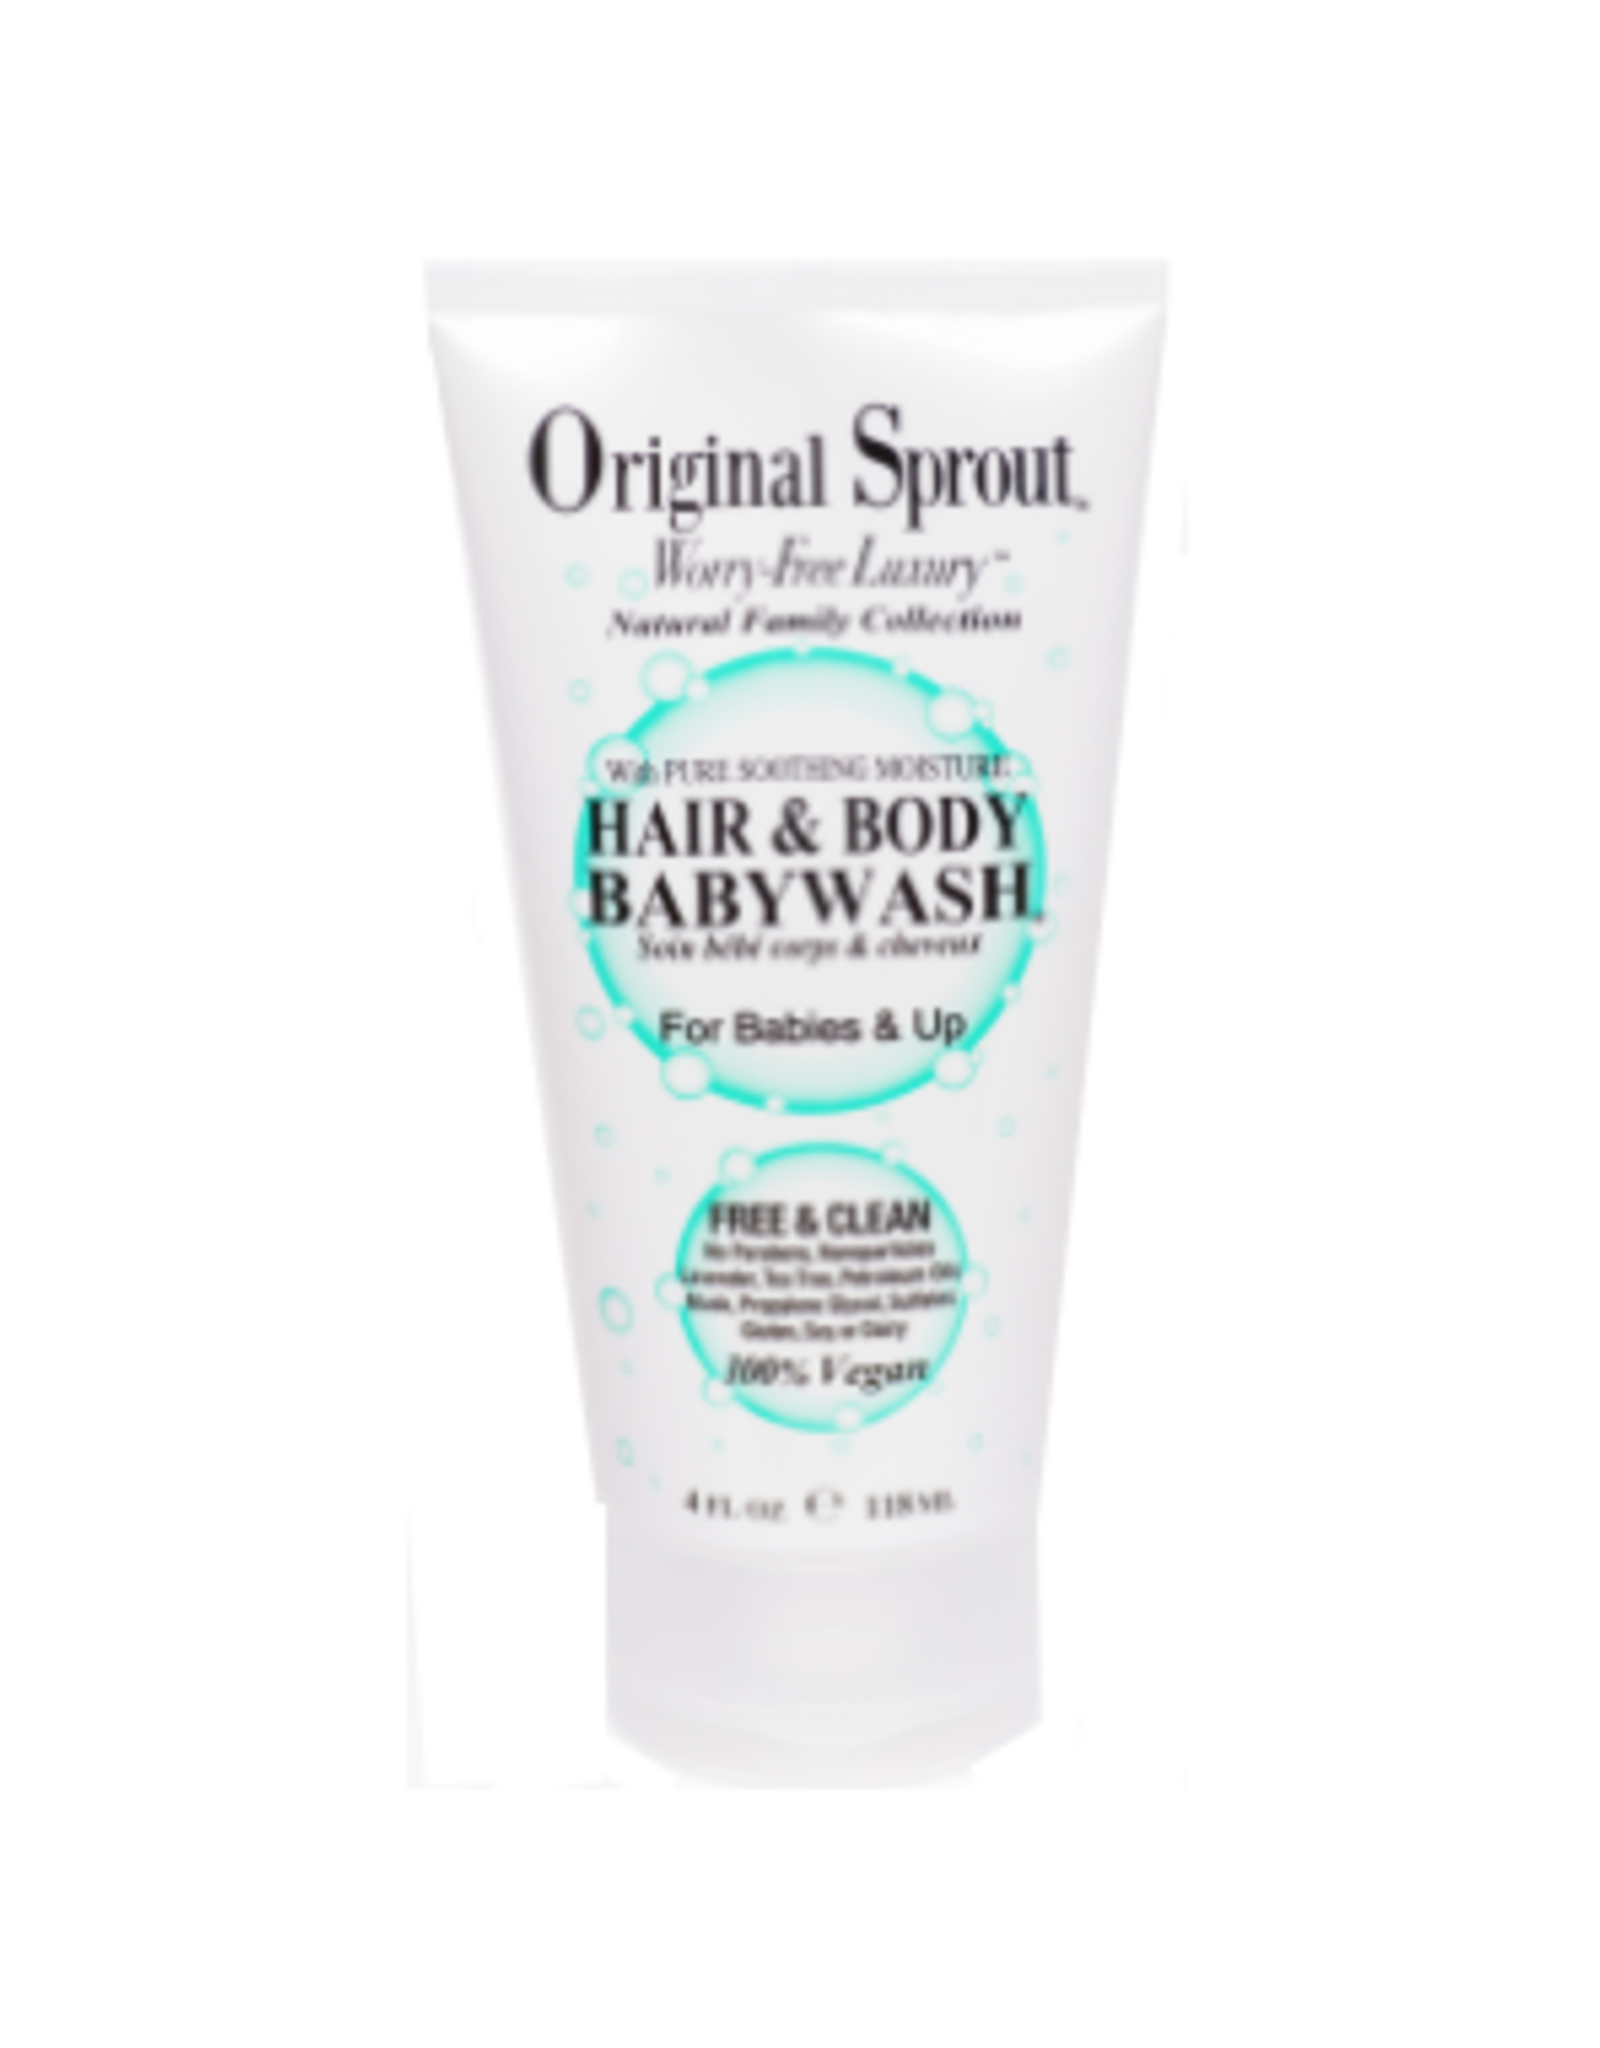 Original Sprout Original Sprout - Hair & Body Baby Wash 4oz.